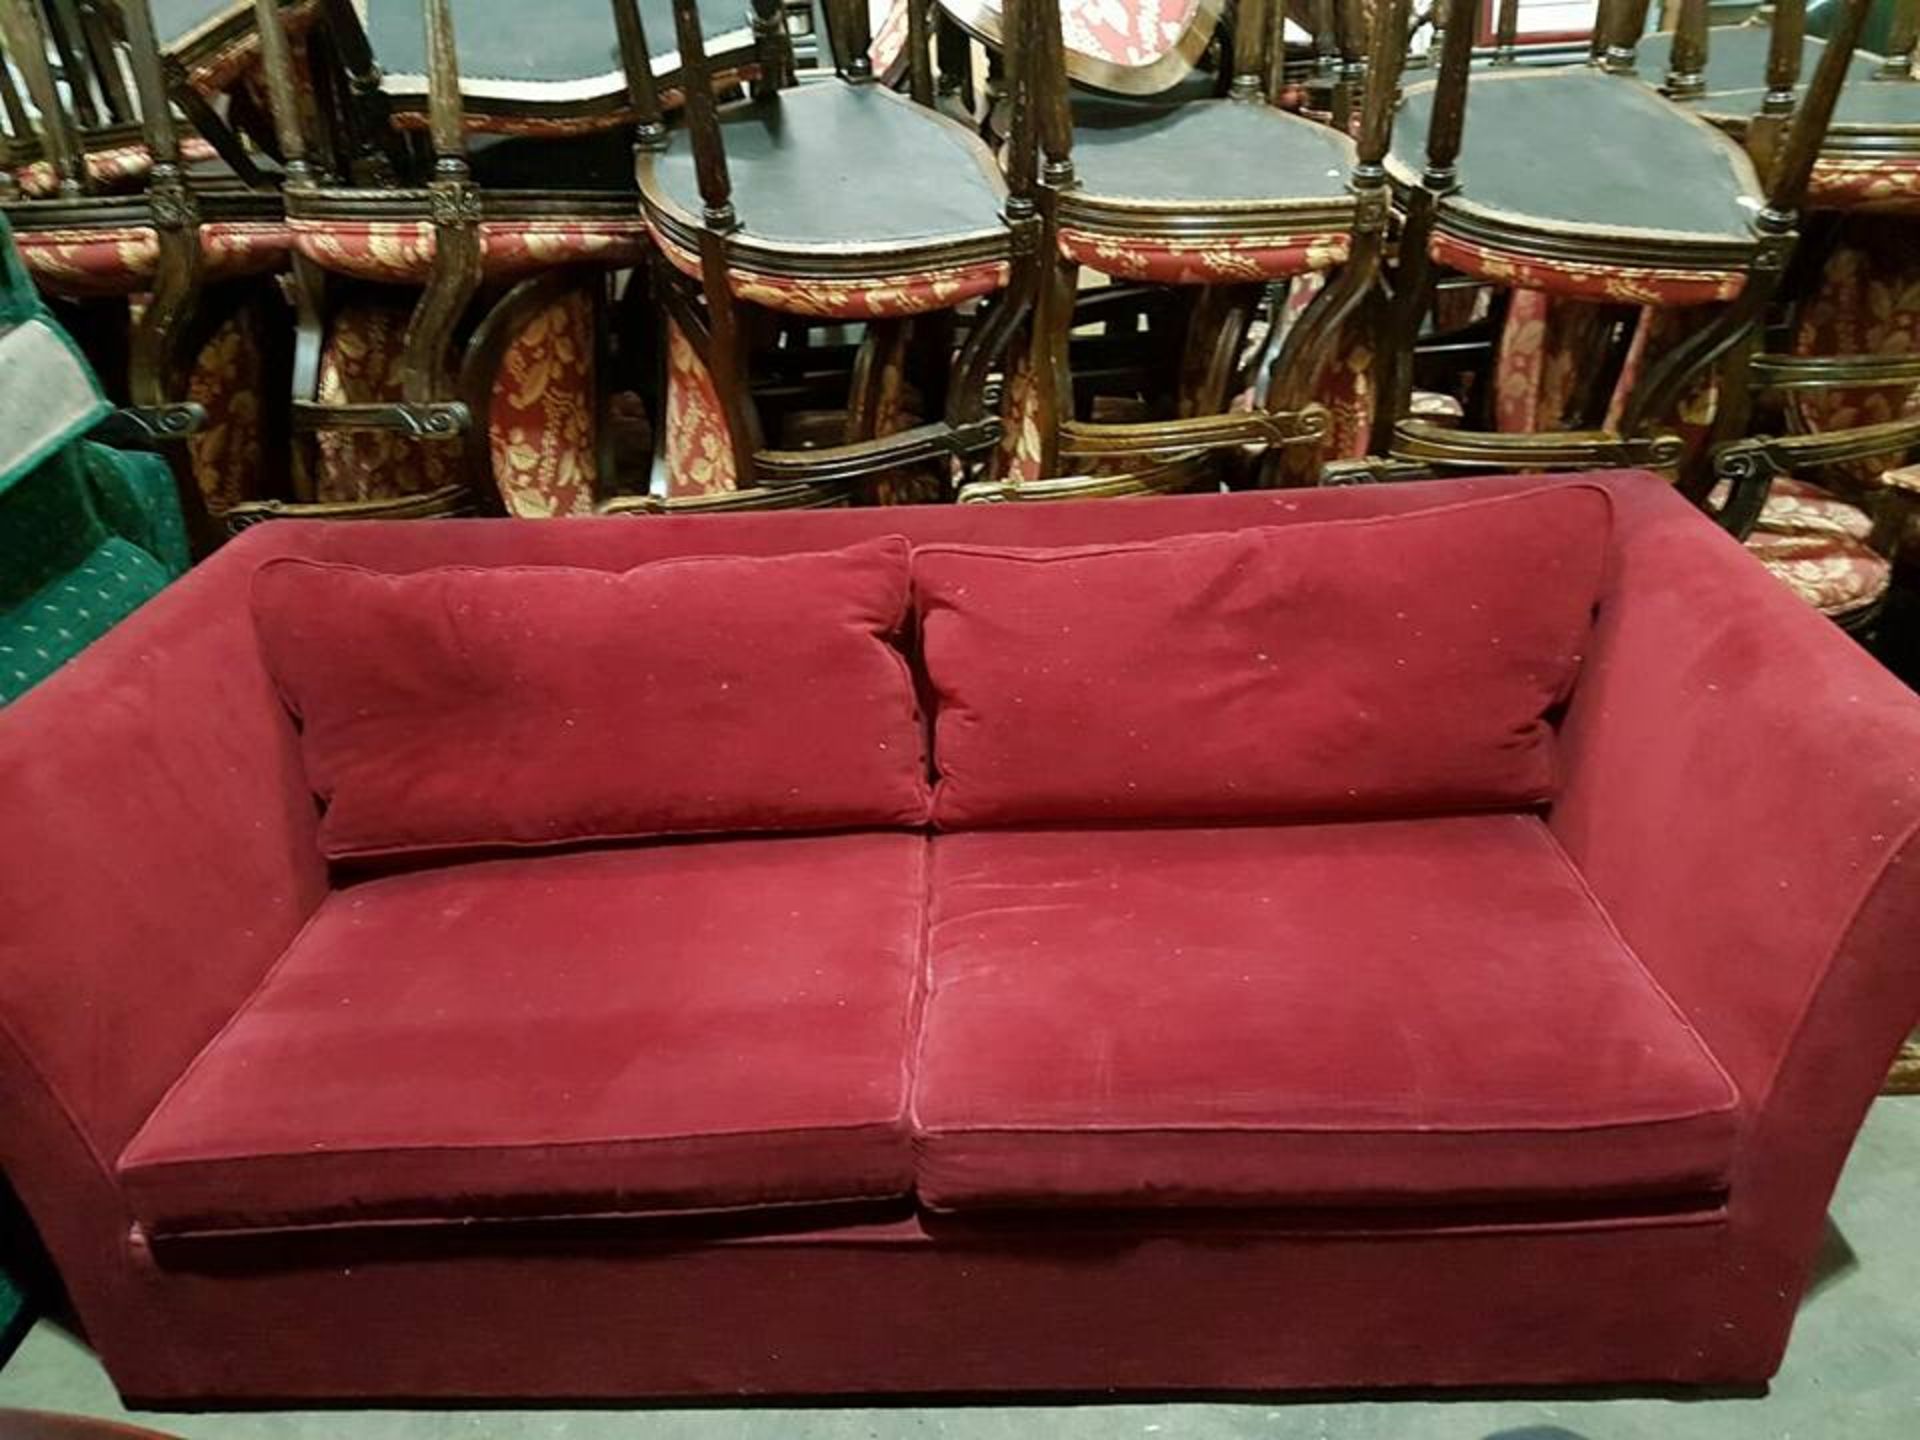 Two seater sofa red upholstered contract grade hardwood framed with high rolled arms seat cushion,